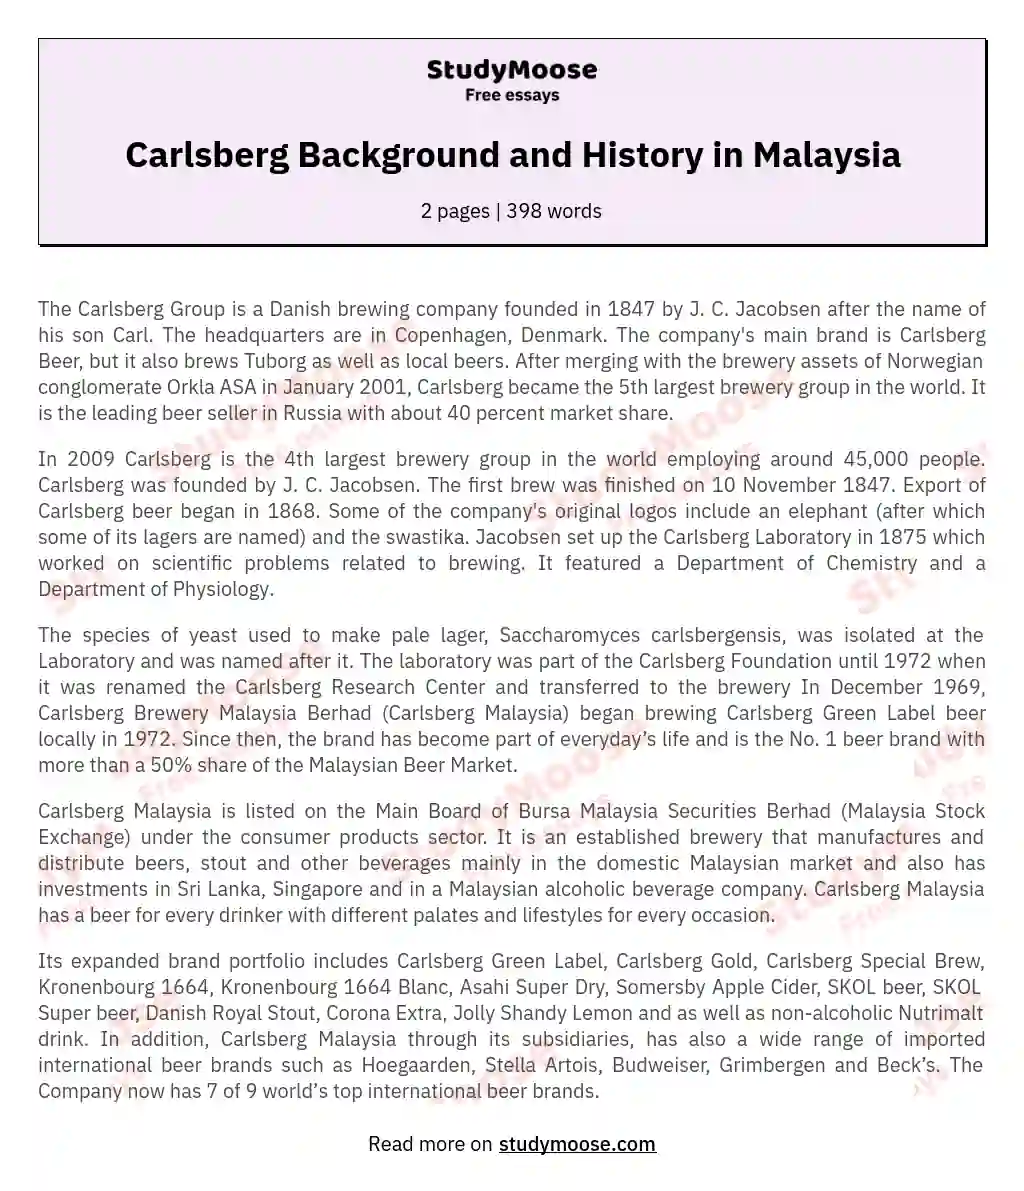 Carlsberg Background and History in Malaysia essay